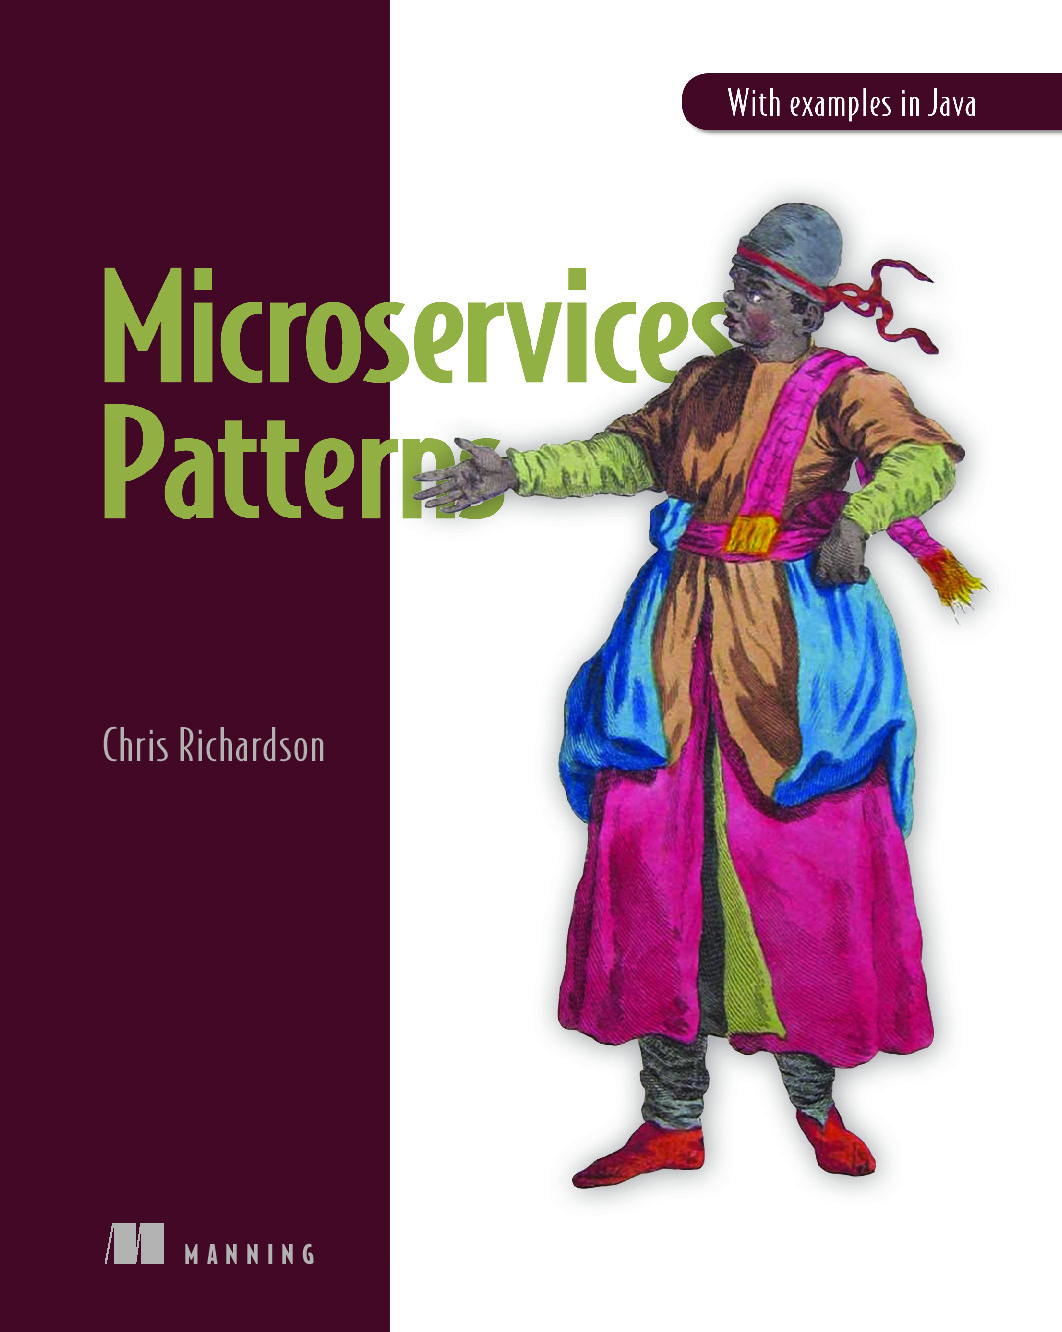 Microservices Patterns – With examples in Java